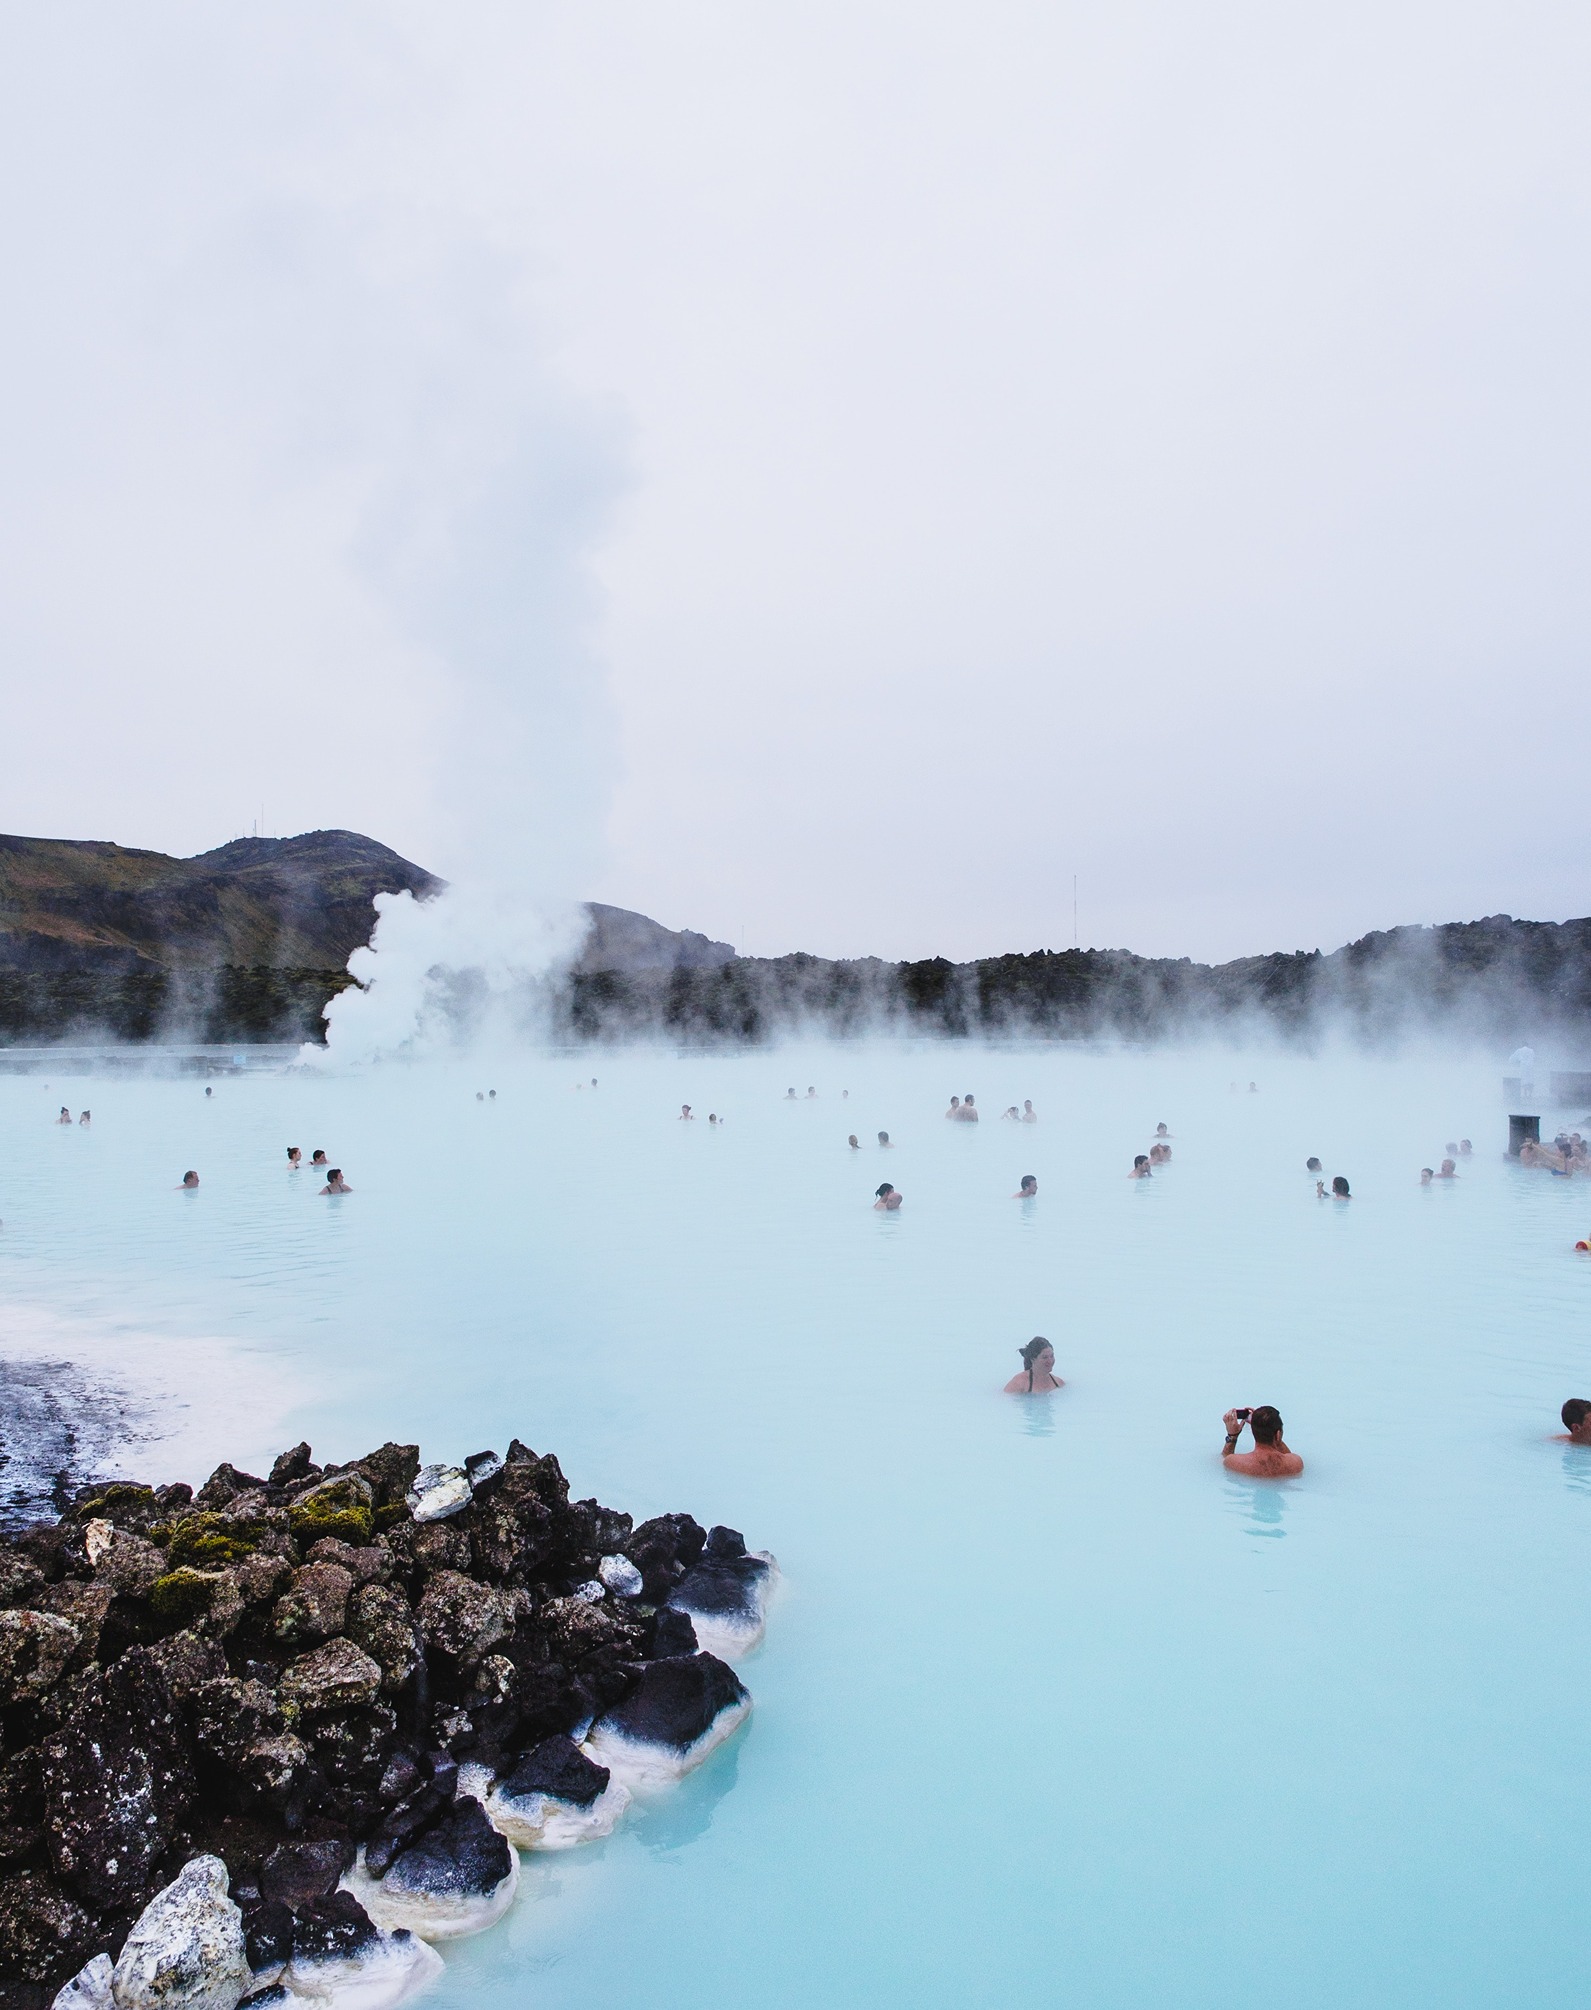 A large light blue coloured thermal bath in Iceland with people bathing and relaxing inside